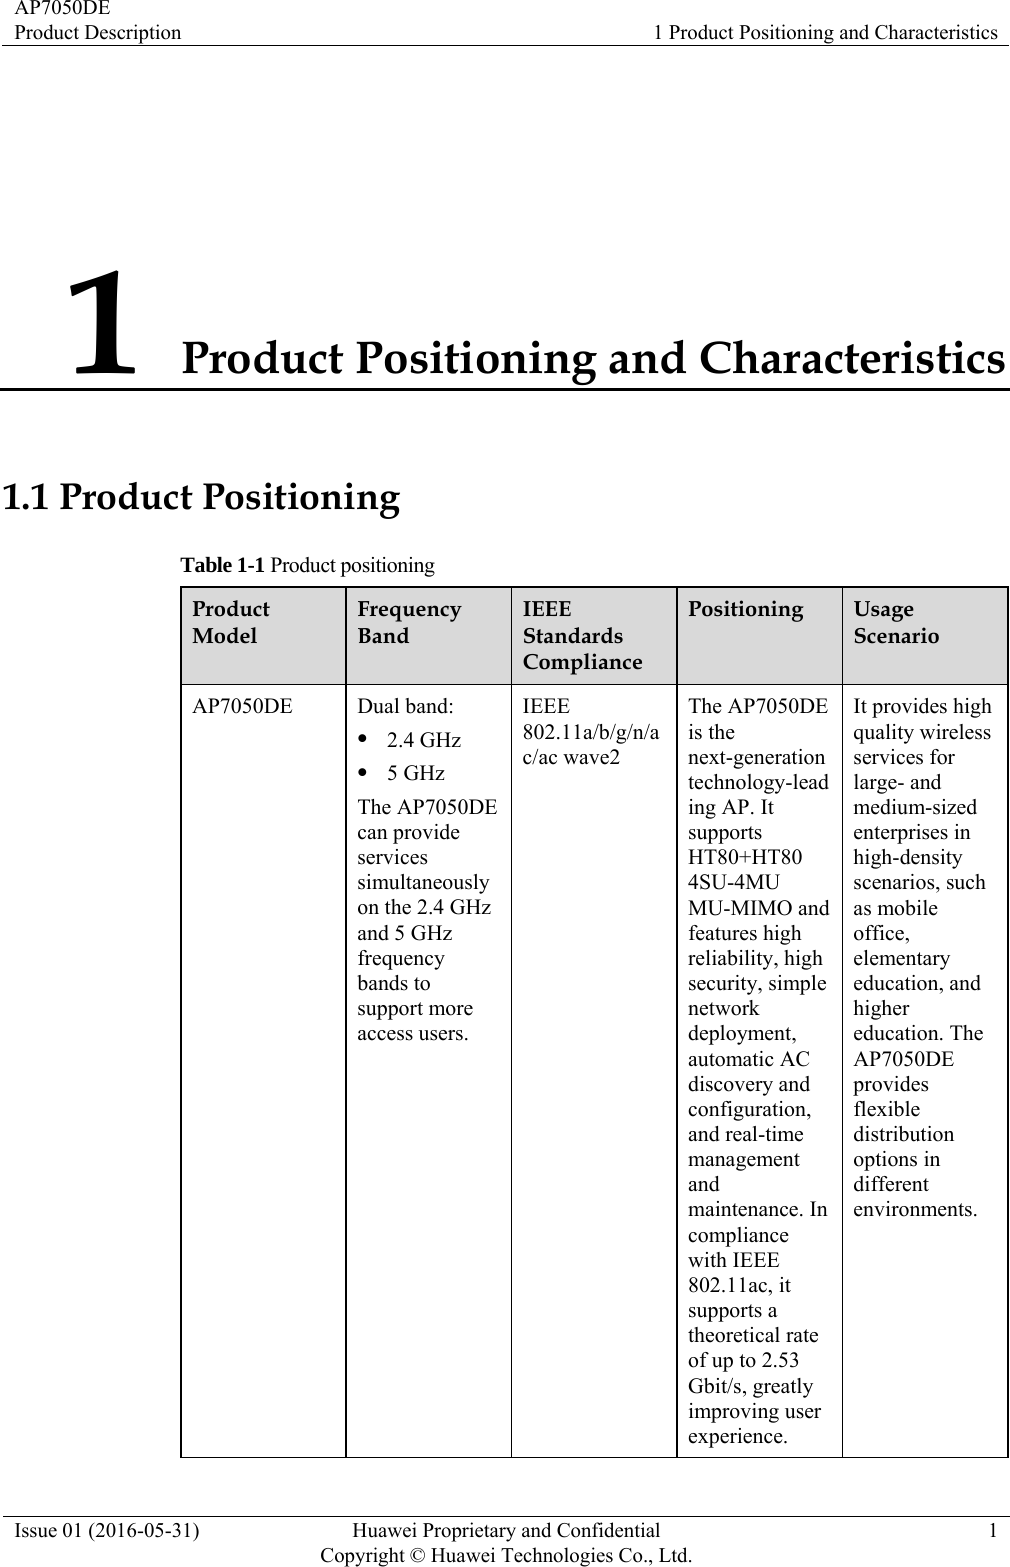 AP7050DE Product Description  1 Product Positioning and Characteristics Issue 01 (2016-05-31)  Huawei Proprietary and Confidential         Copyright © Huawei Technologies Co., Ltd.1 1 Product Positioning and Characteristics 1.1 Product Positioning Table 1-1 Product positioning Product Model Frequency Band IEEE Standards Compliance Positioning  Usage Scenario AP7050DE Dual band:  2.4 GHz  5 GHz The AP7050DE can provide services simultaneously on the 2.4 GHz and 5 GHz frequency bands to support more access users. IEEE 802.11a/b/g/n/ac/ac wave2 The AP7050DE is the next-generation technology-leading AP. It supports HT80+HT80 4SU-4MU MU-MIMO and features high reliability, high security, simple network deployment, automatic AC discovery and configuration, and real-time management and maintenance. In compliance with IEEE 802.11ac, it supports a theoretical rate of up to 2.53 Gbit/s, greatly improving user experience. It provides high quality wireless services for large- and medium-sized enterprises in high-density scenarios, such as mobile office, elementary education, and higher education. The AP7050DE provides flexible distribution options in different environments. 